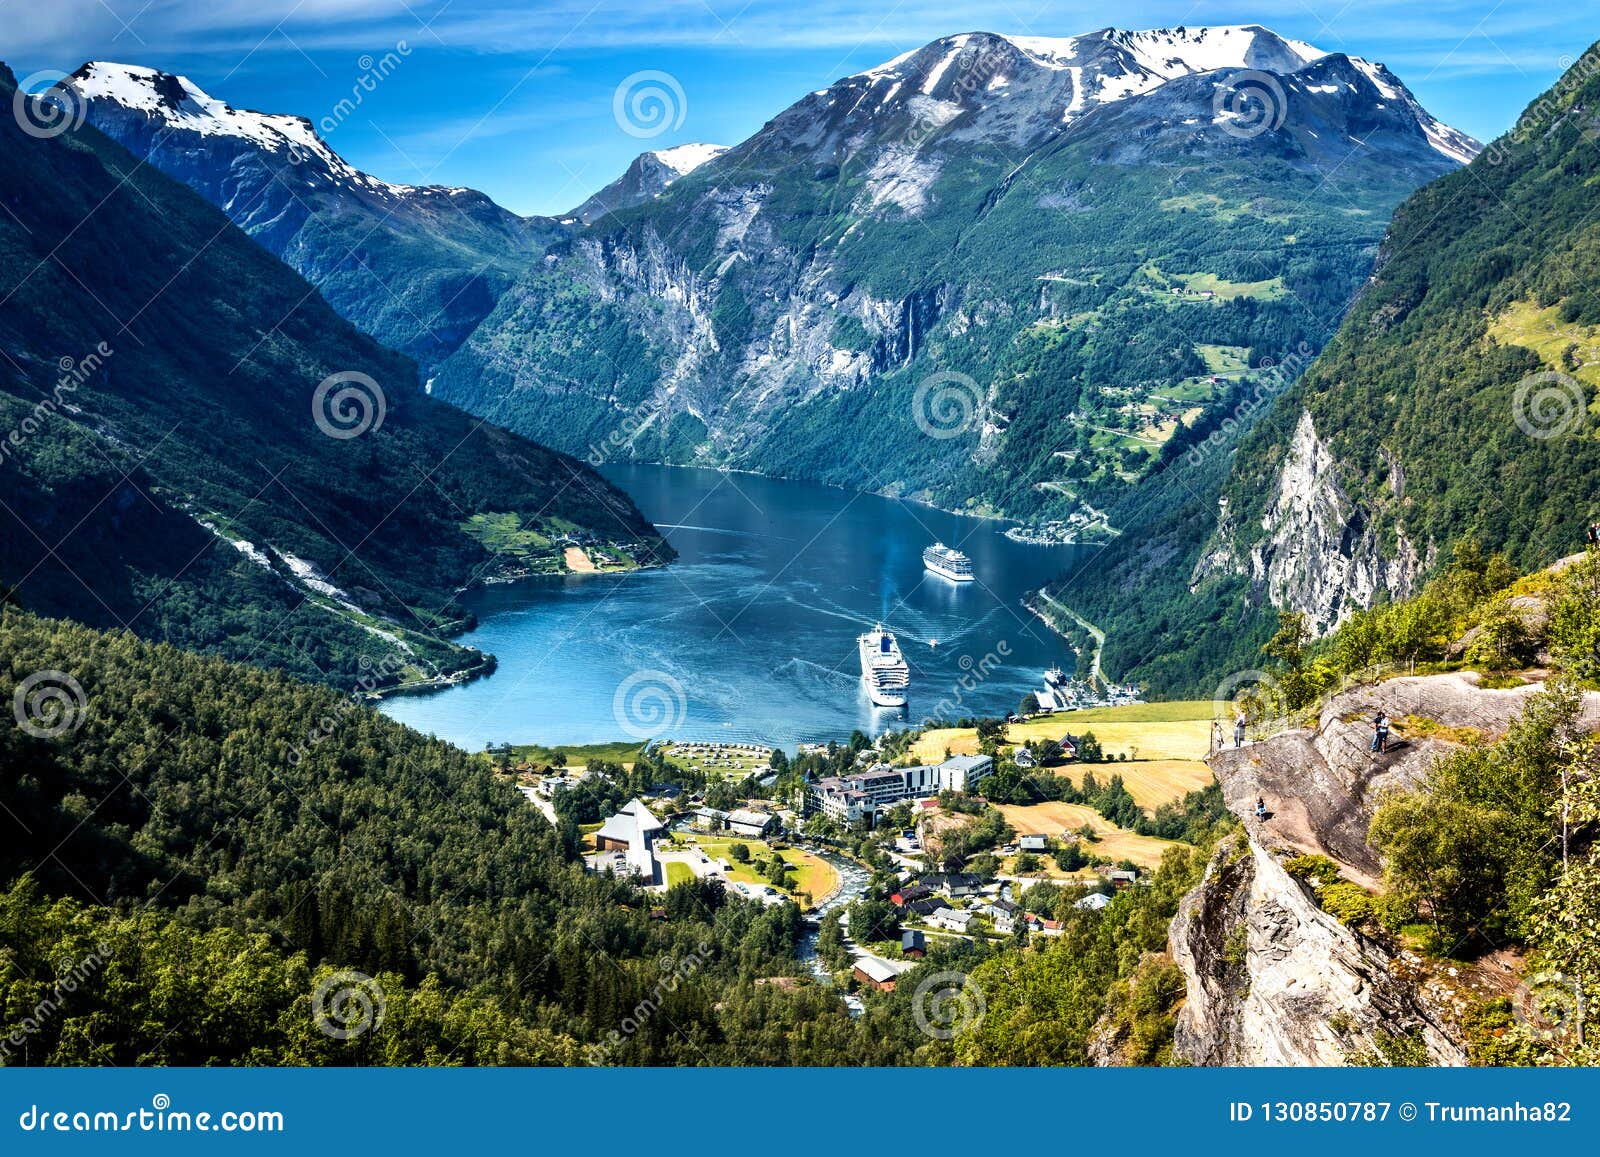 mountain landscape with aerial view of geiranger fjord in summer